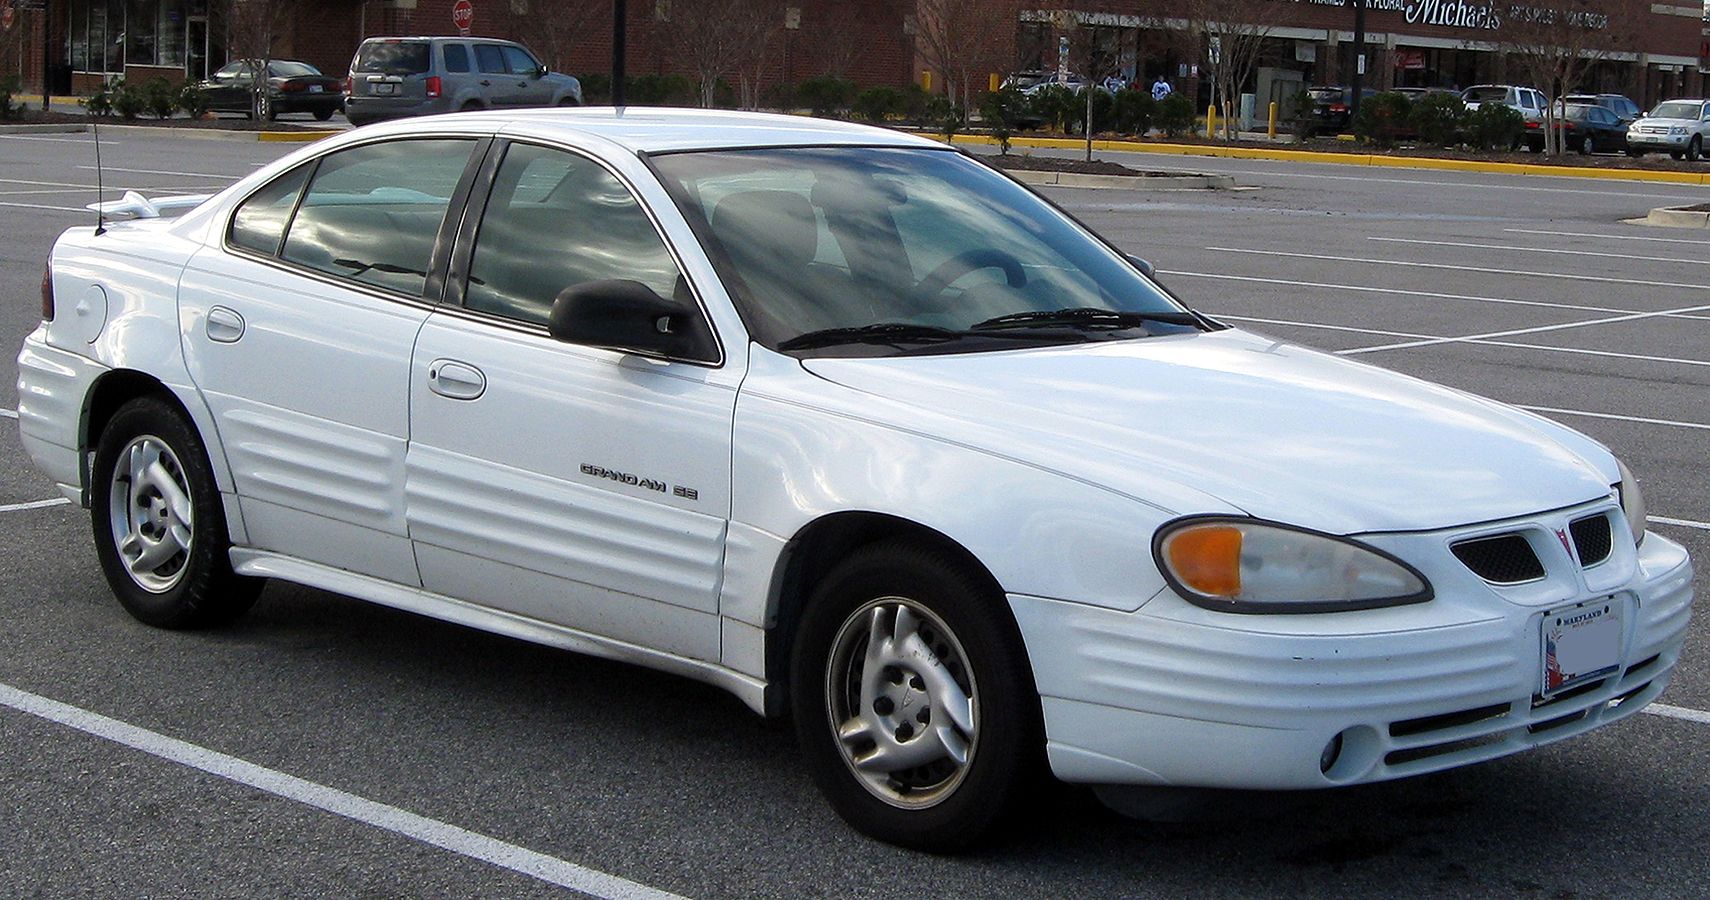 1999-2005 Pontiac Grand Am: A Bestseller But With Issues